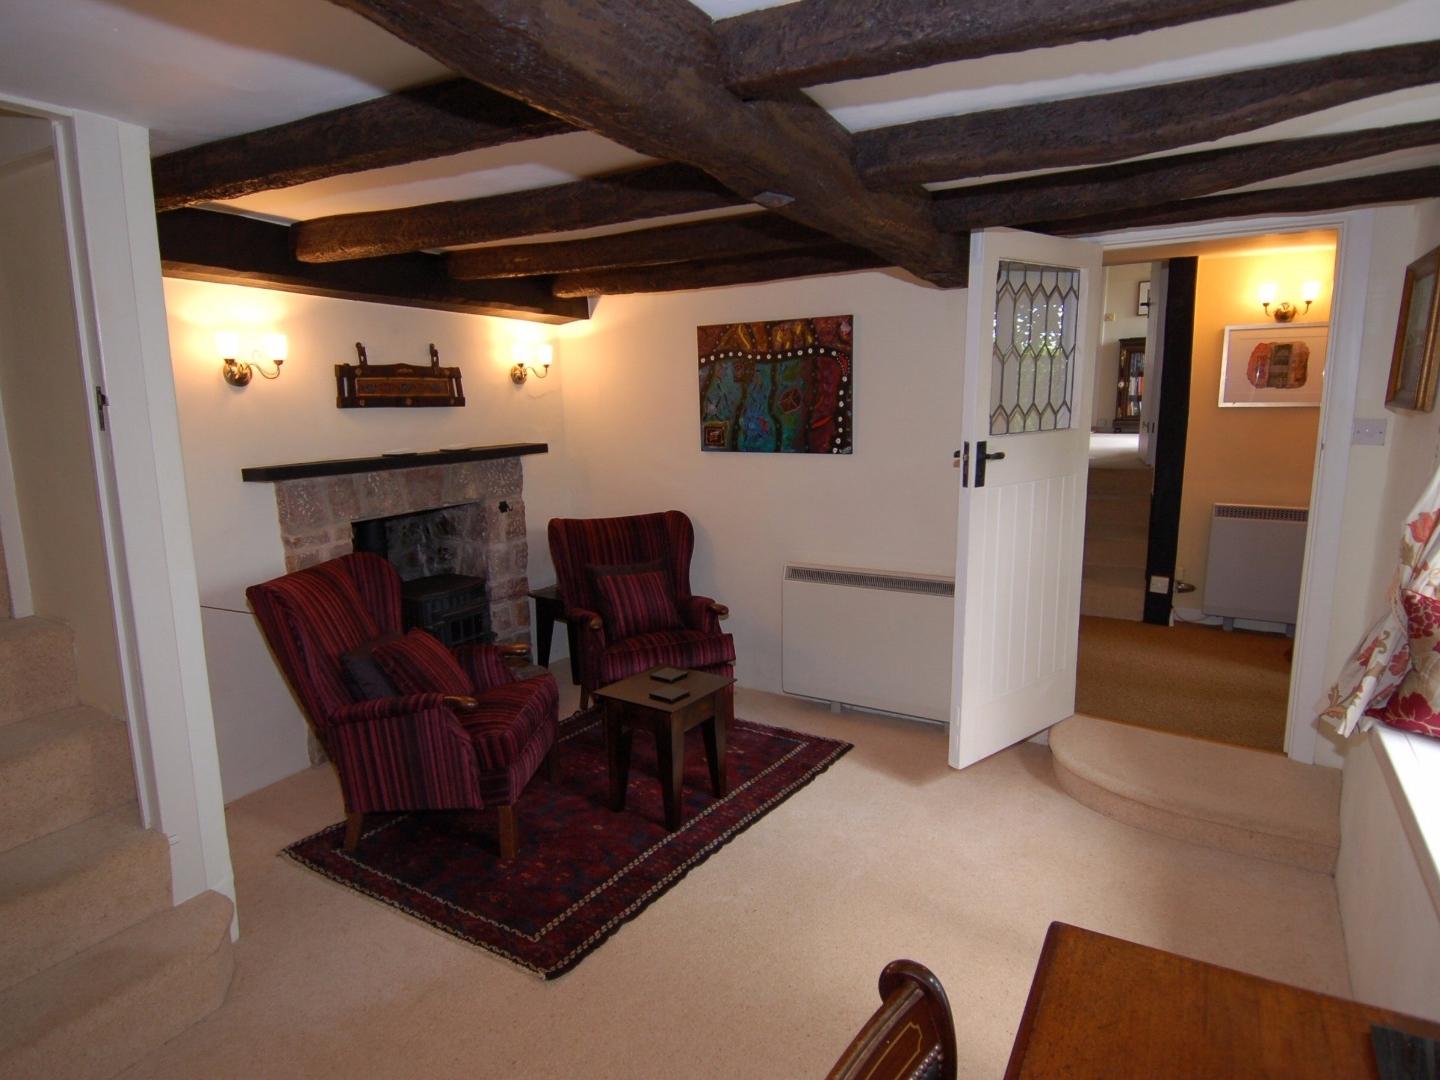 Appletree Cottage, Bovey Tracey, Devon - Holiday Cottage Reviews